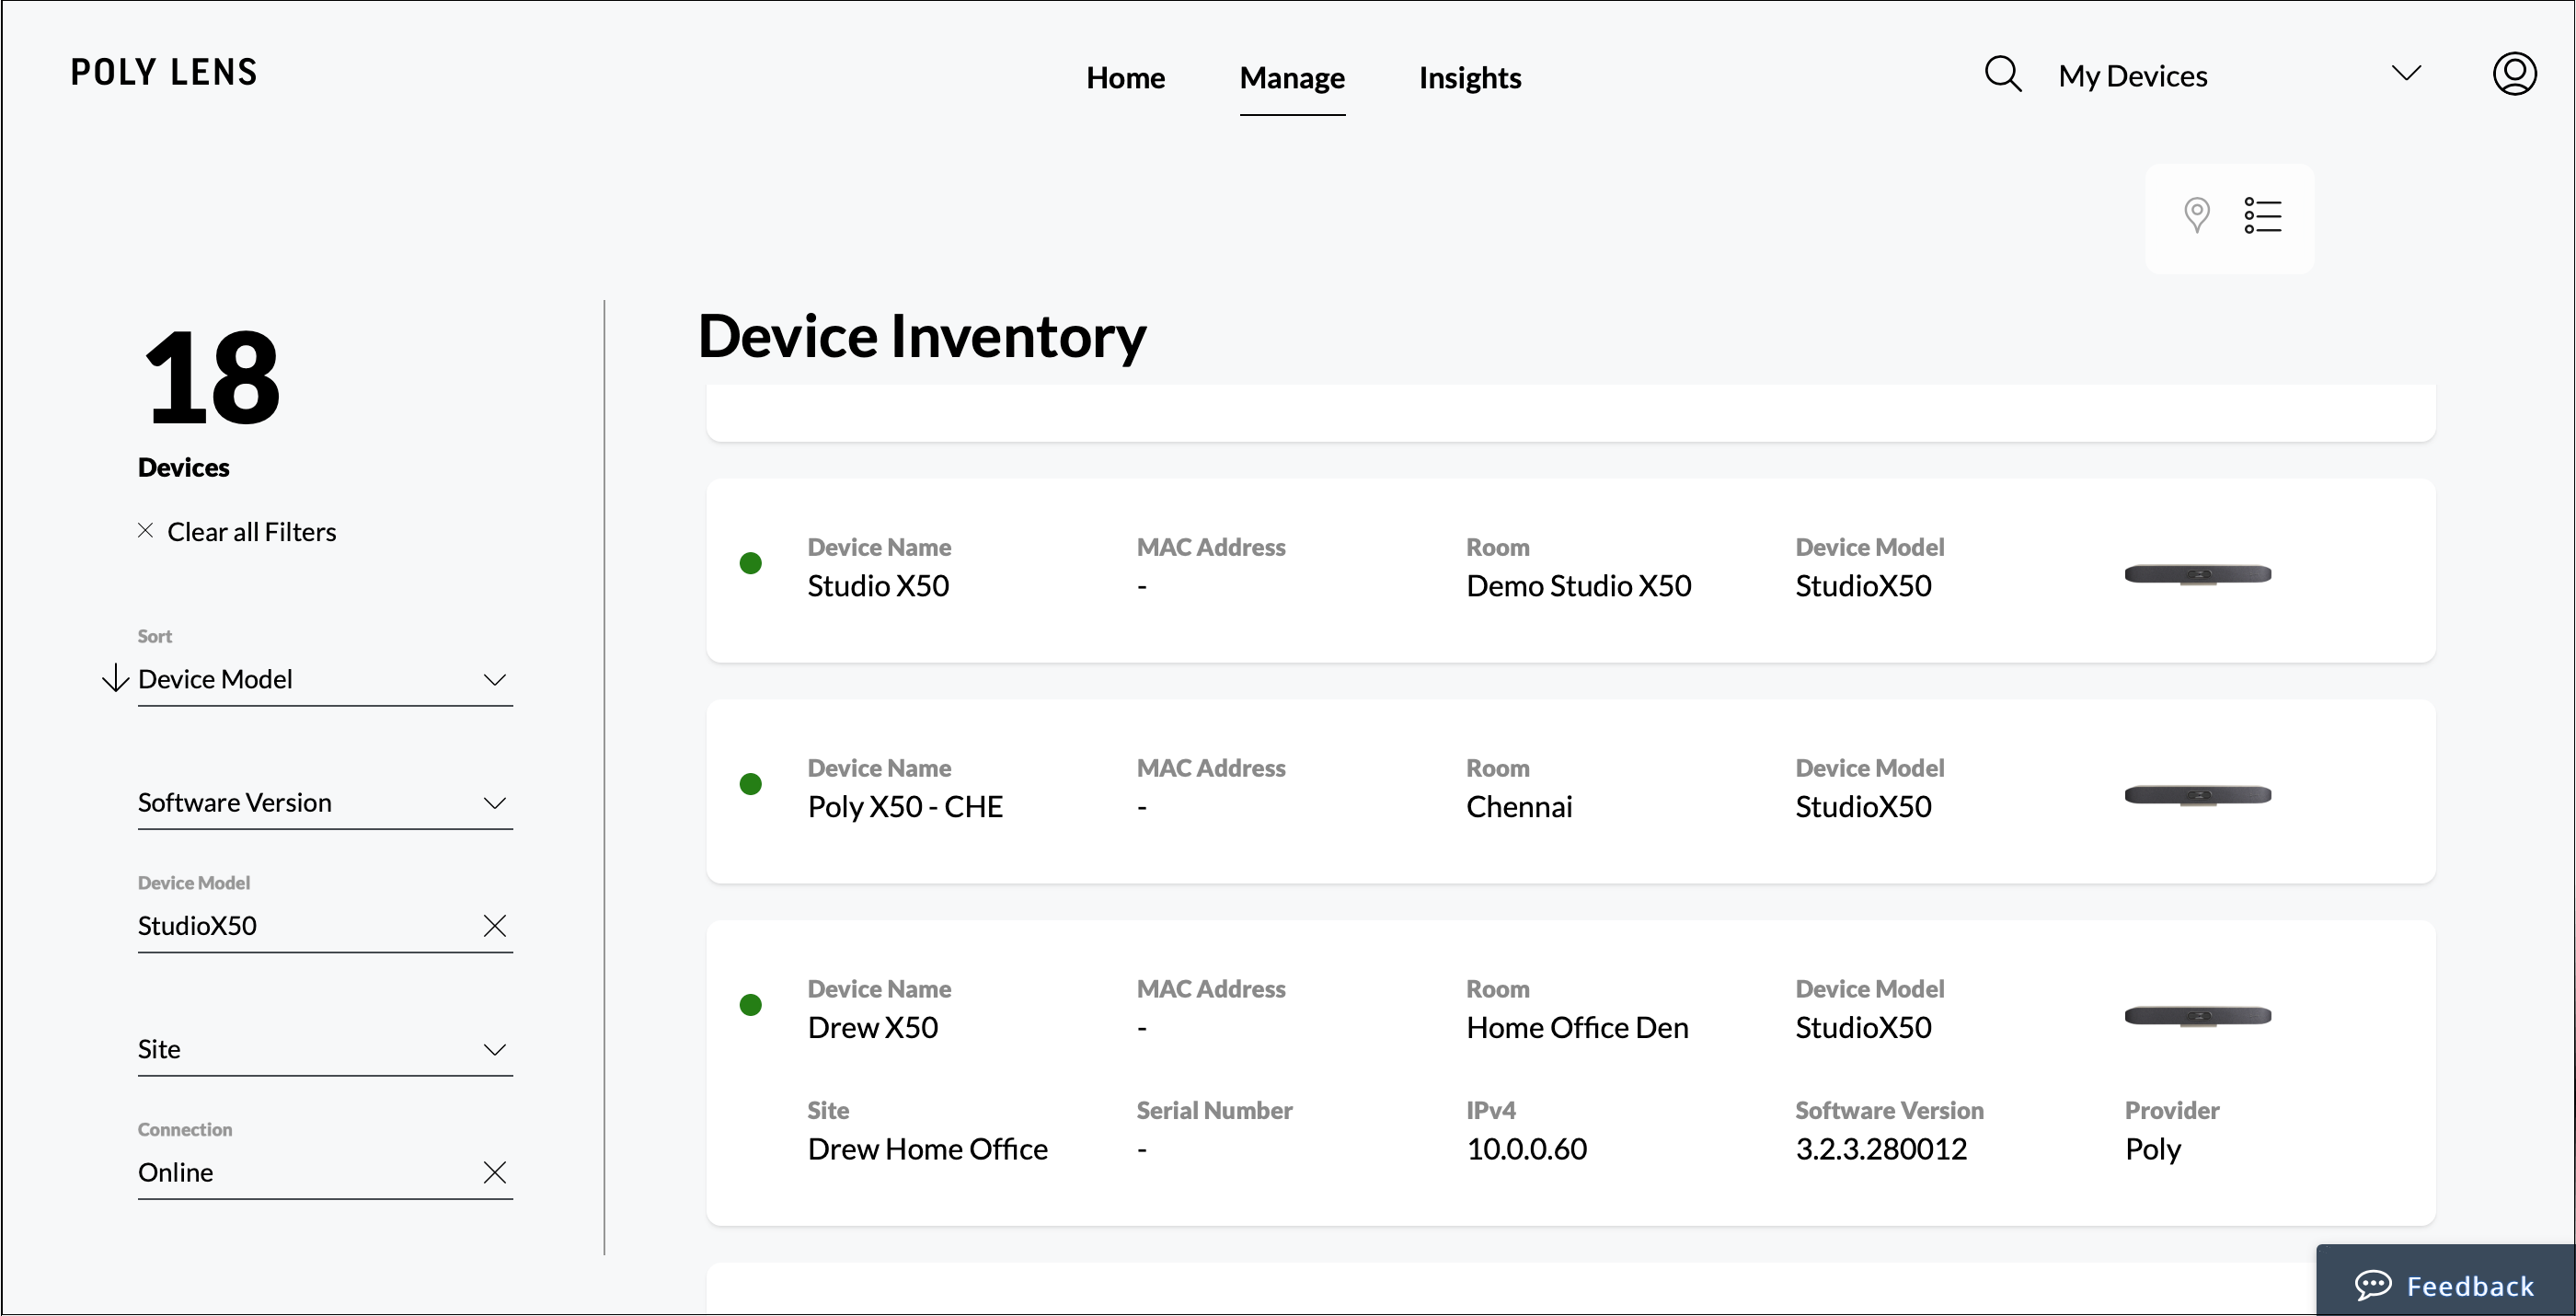 Poly Lens Device Inventory page